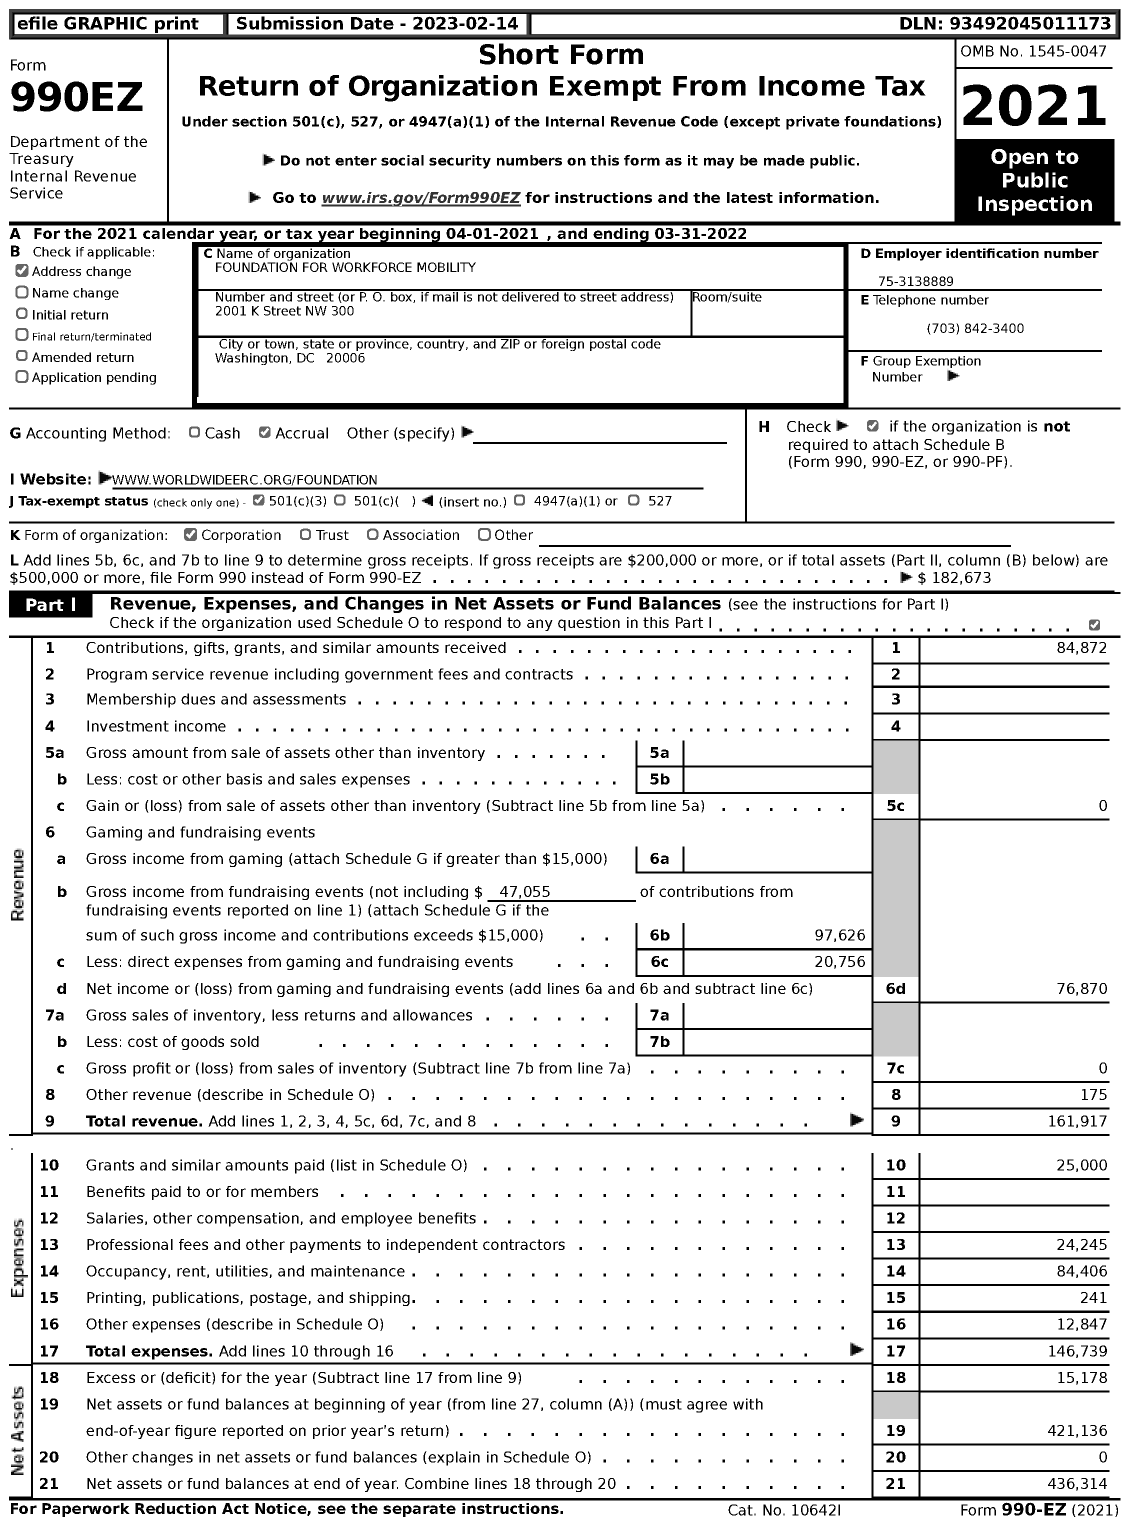 Image of first page of 2021 Form 990EZ for Foundation for Workforce Mobility